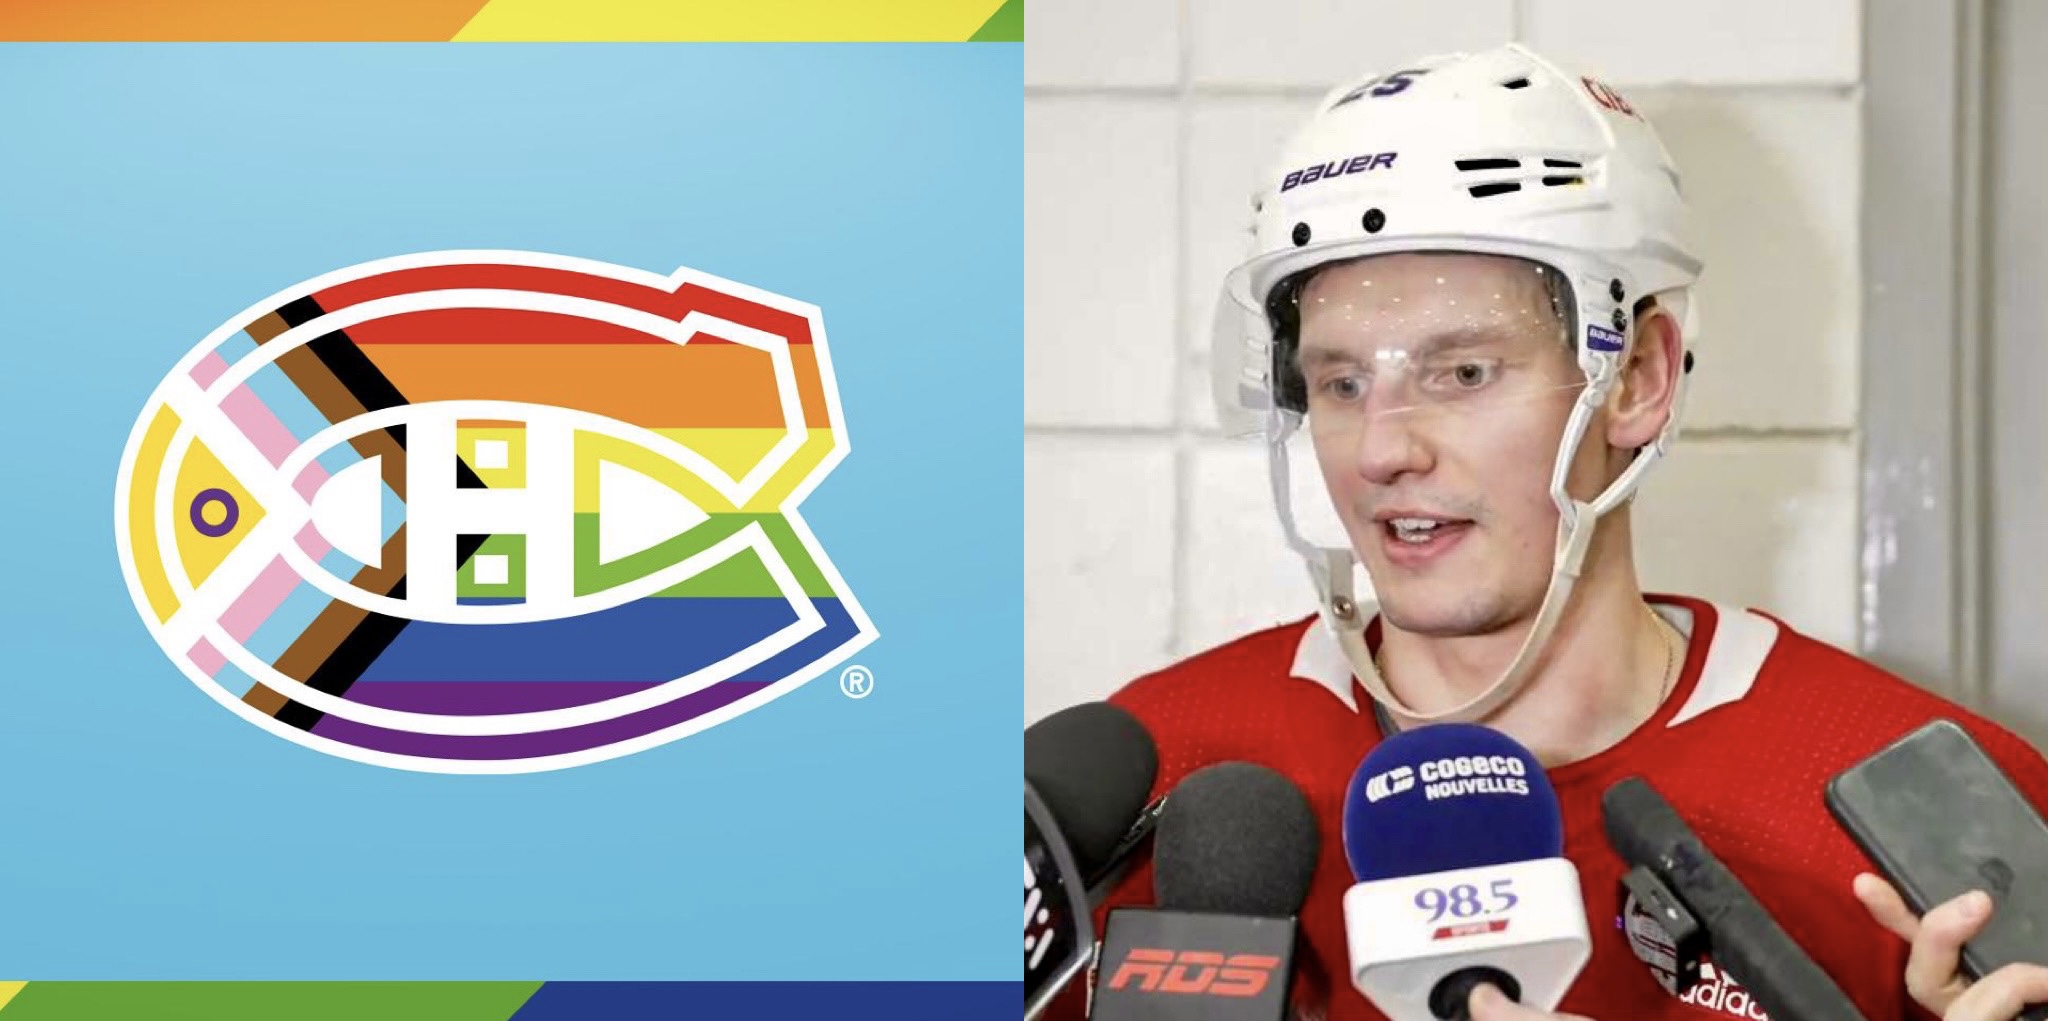 Of course, one of the Habs (from Russia) chose not to wear the Pride jersey